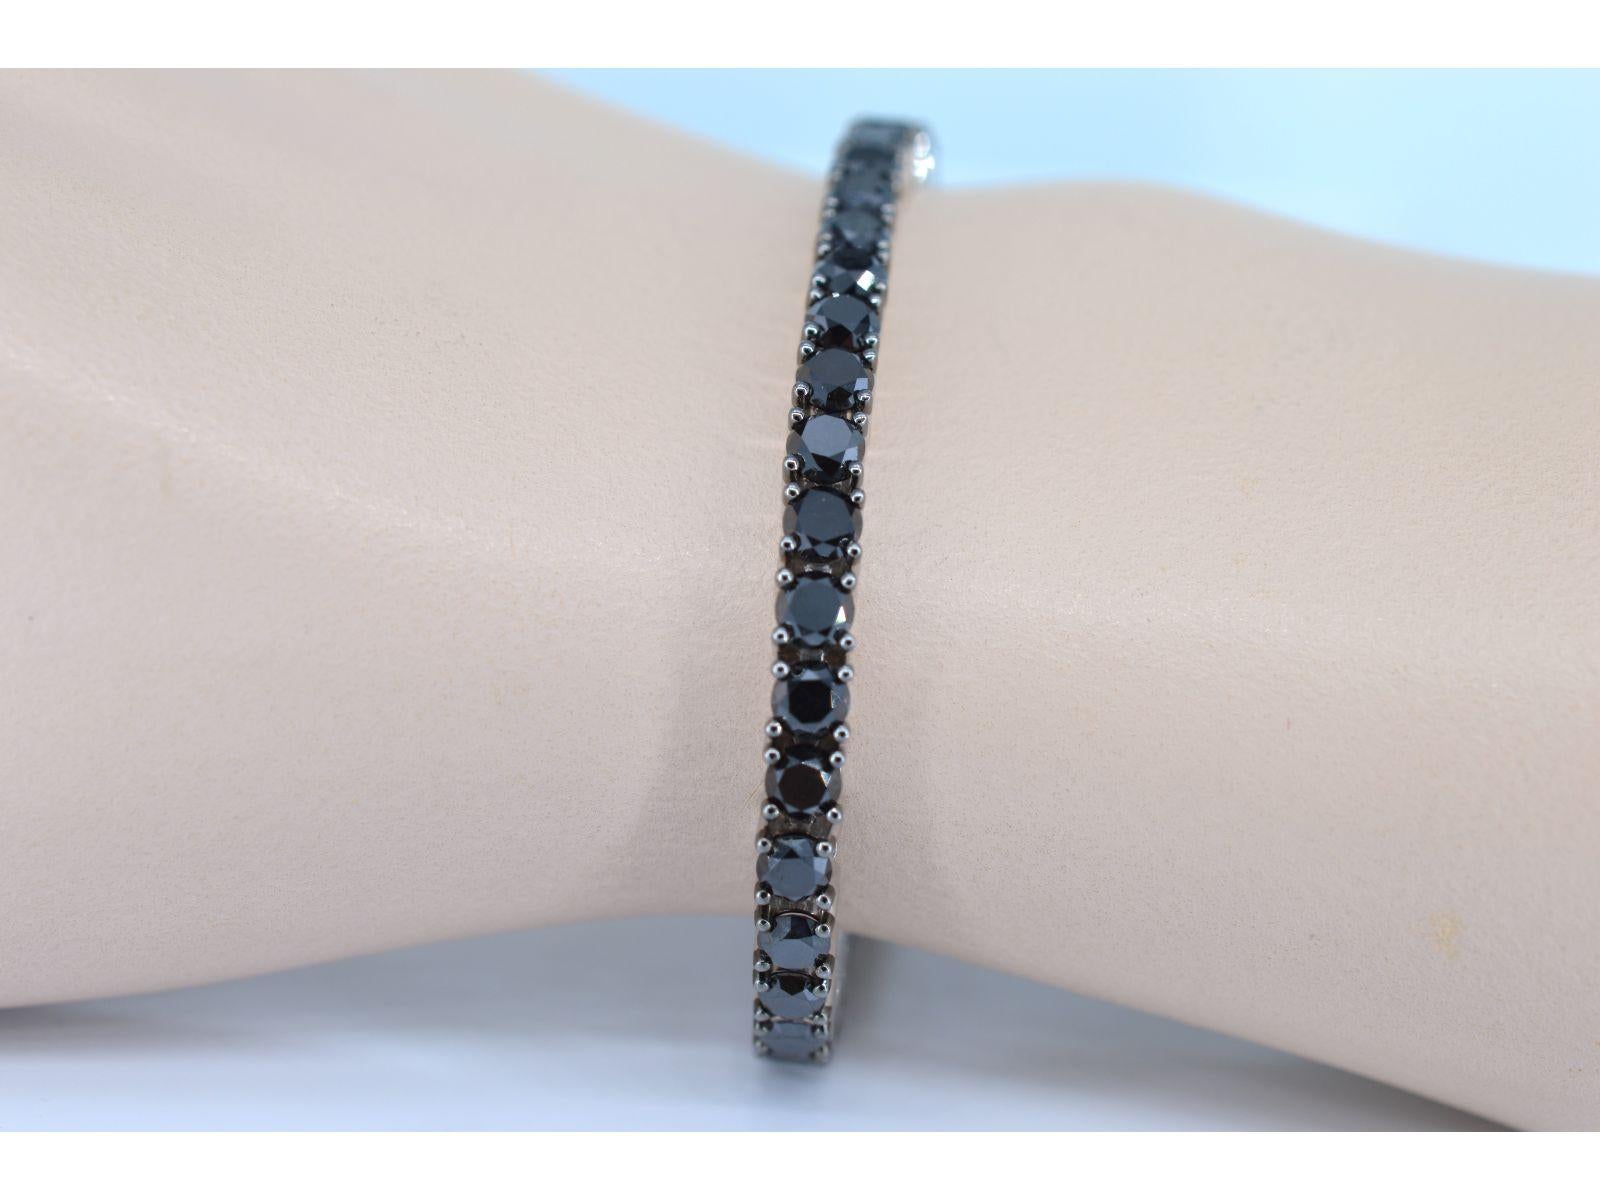 The item in question is a luxurious bracelet adorned with 44 black diamonds, boasting a total weight of 16.50 carats. The diamonds are cut in the brilliant style, which enhances their sparkle and light reflection. The color of the diamonds is a rich